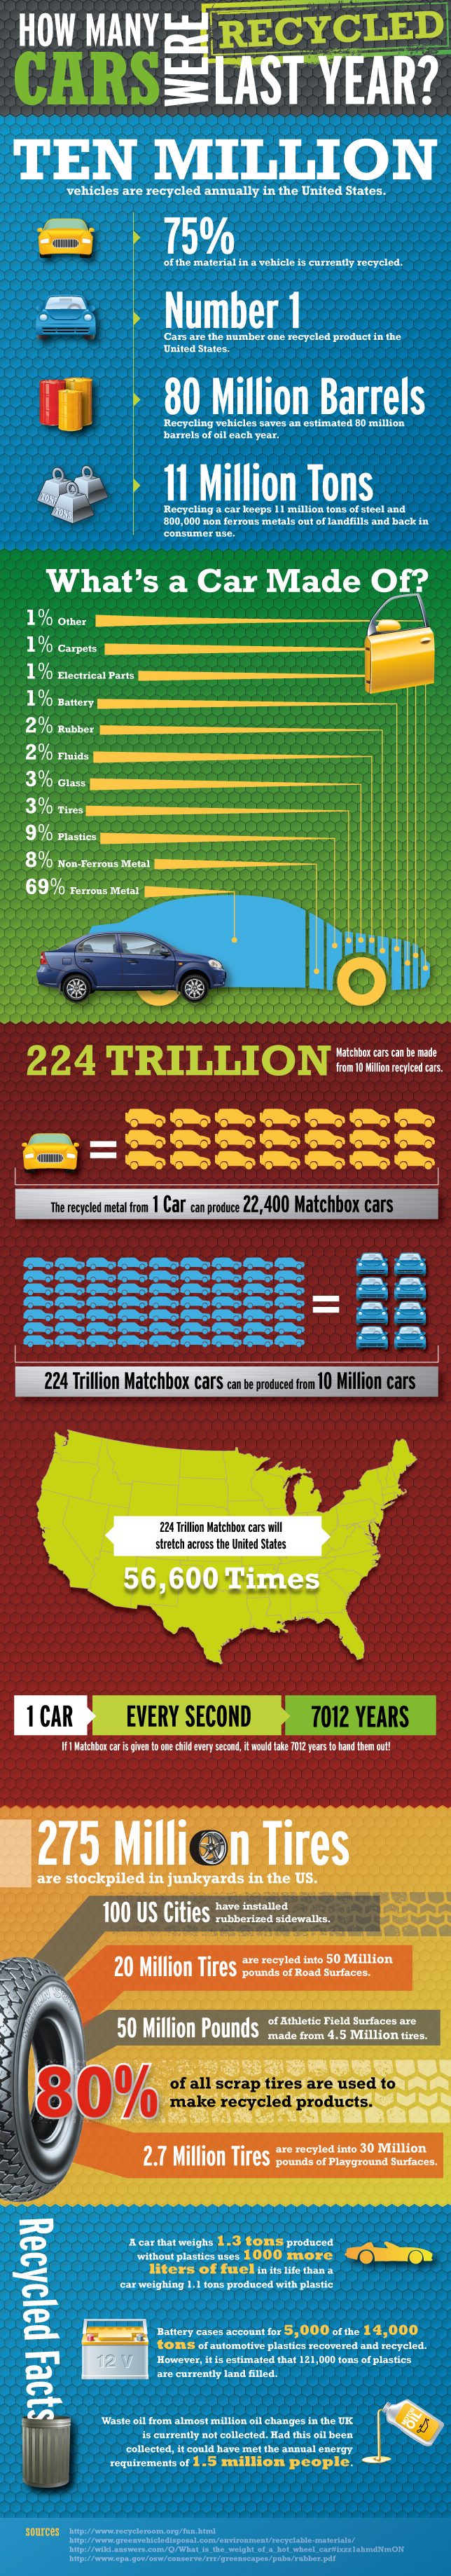 How Many Cars Were Recycled Last Year